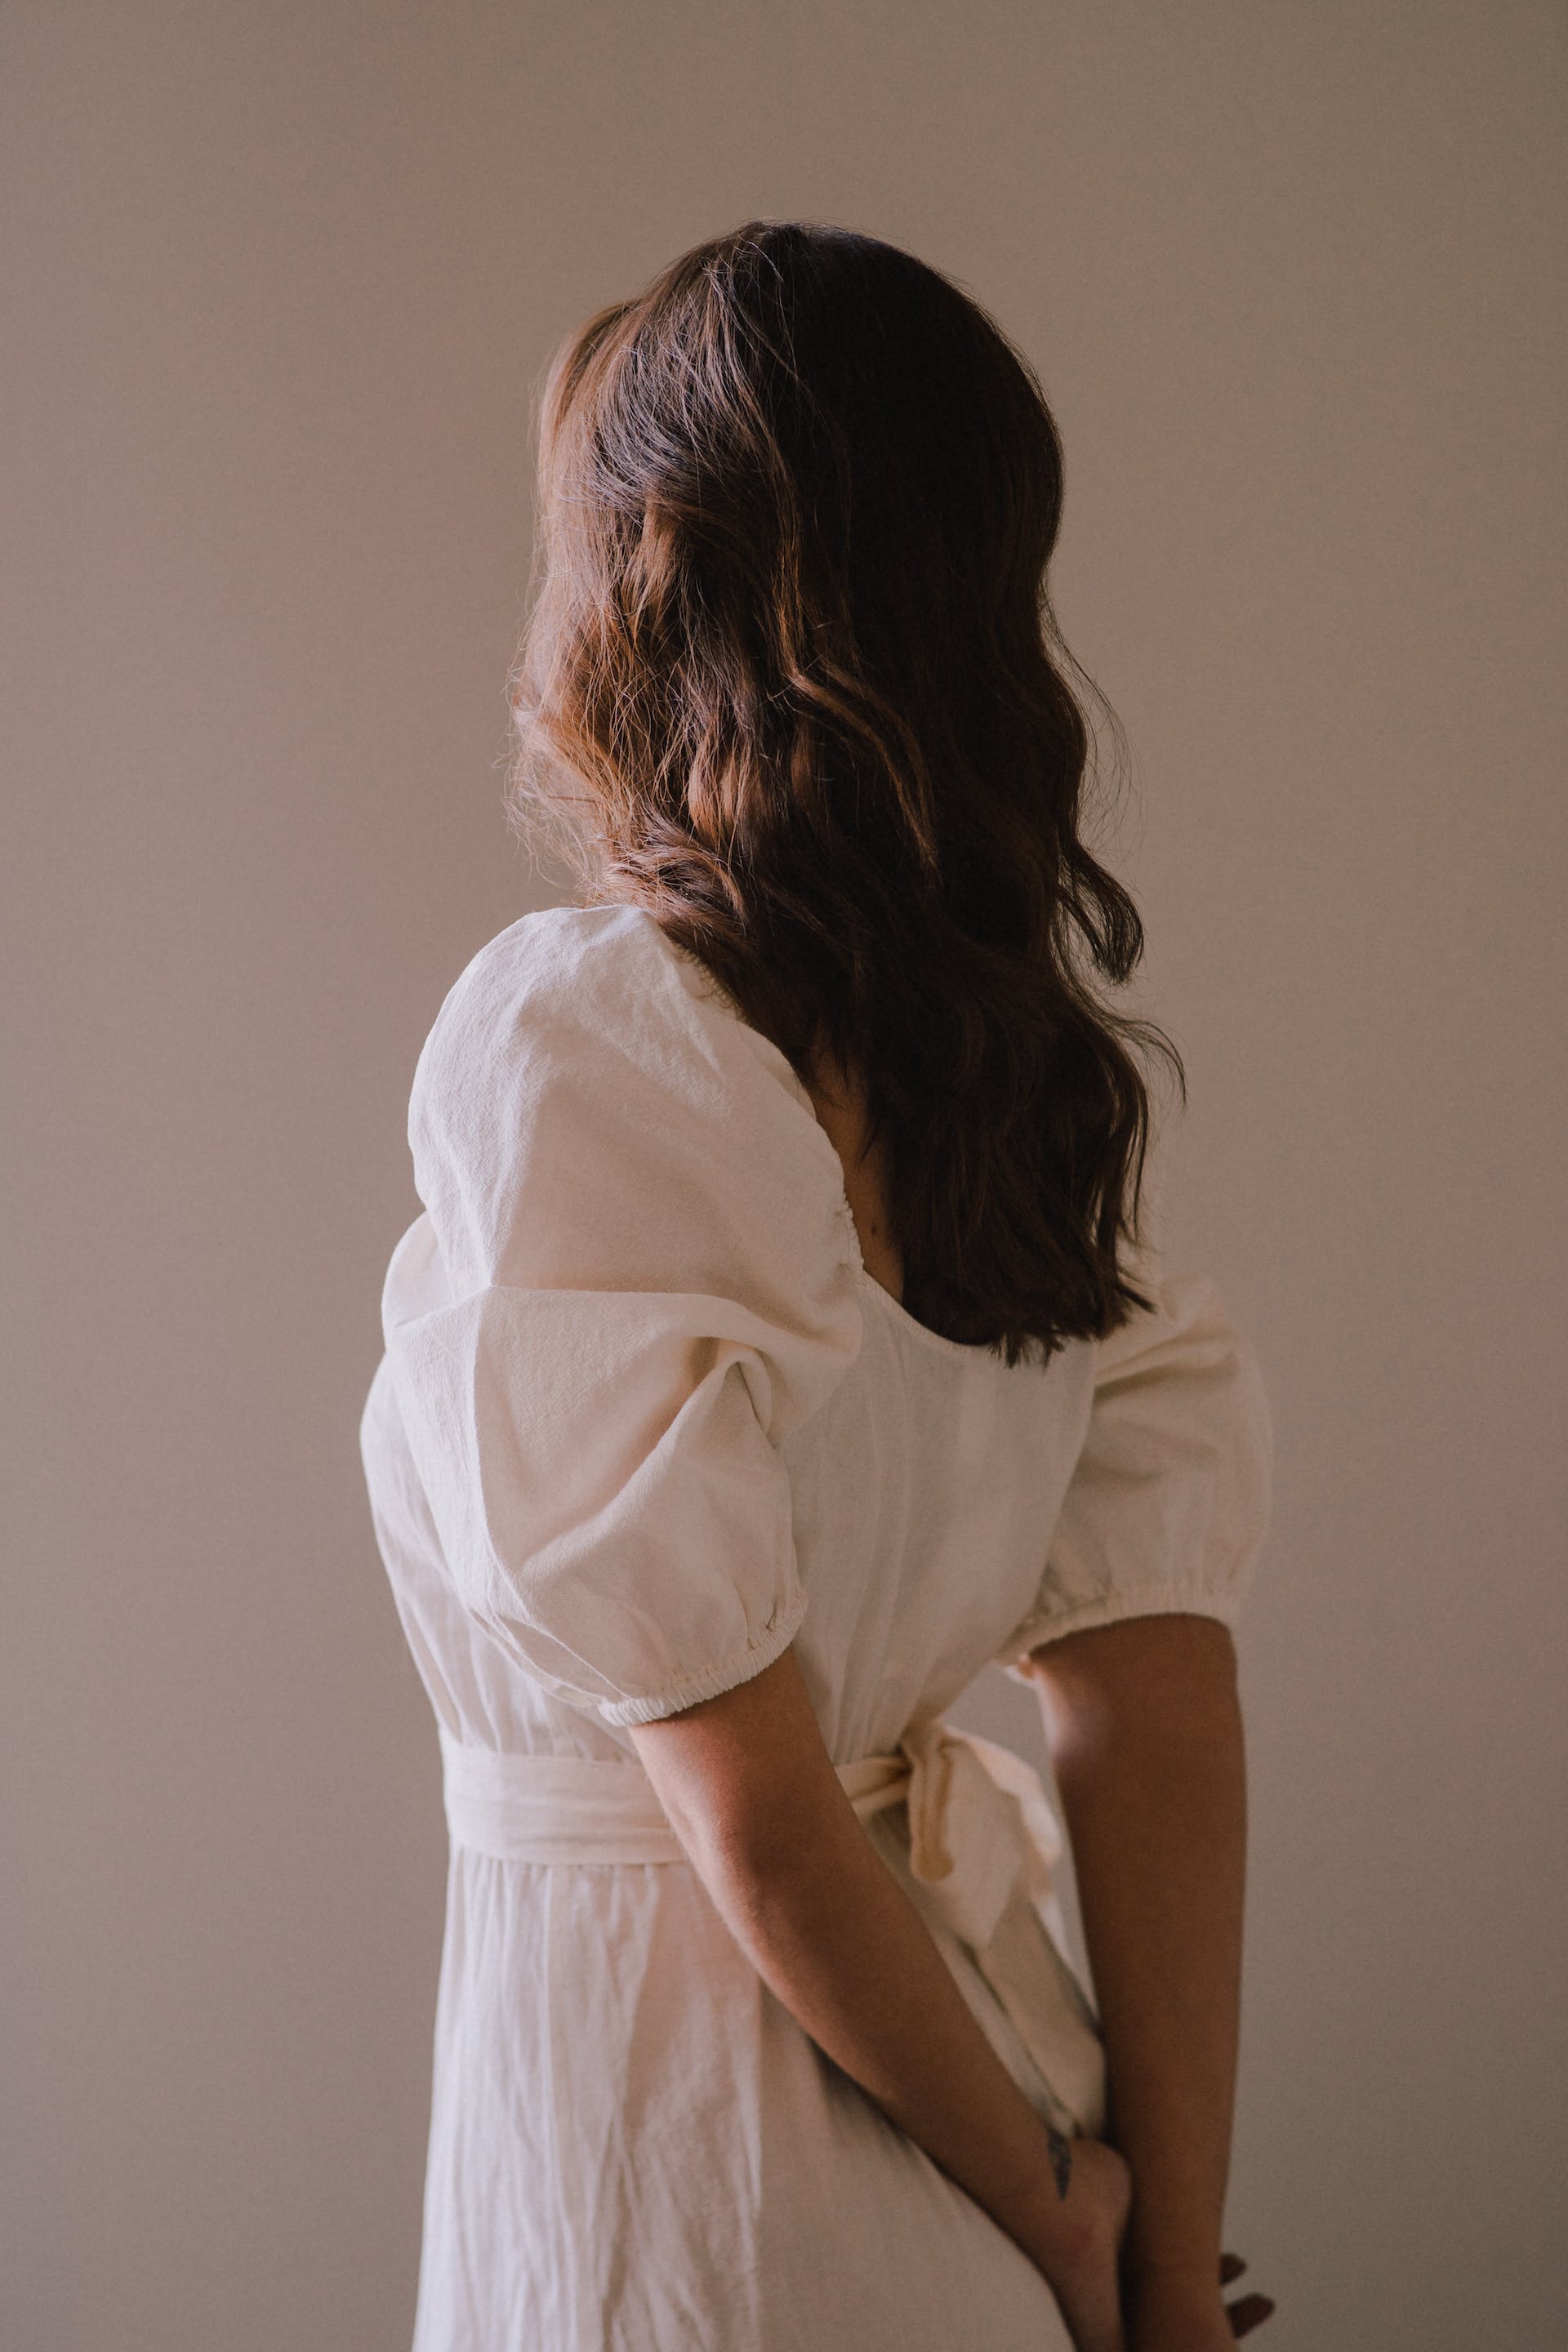 Woman standing in white dress | Source: Pexels